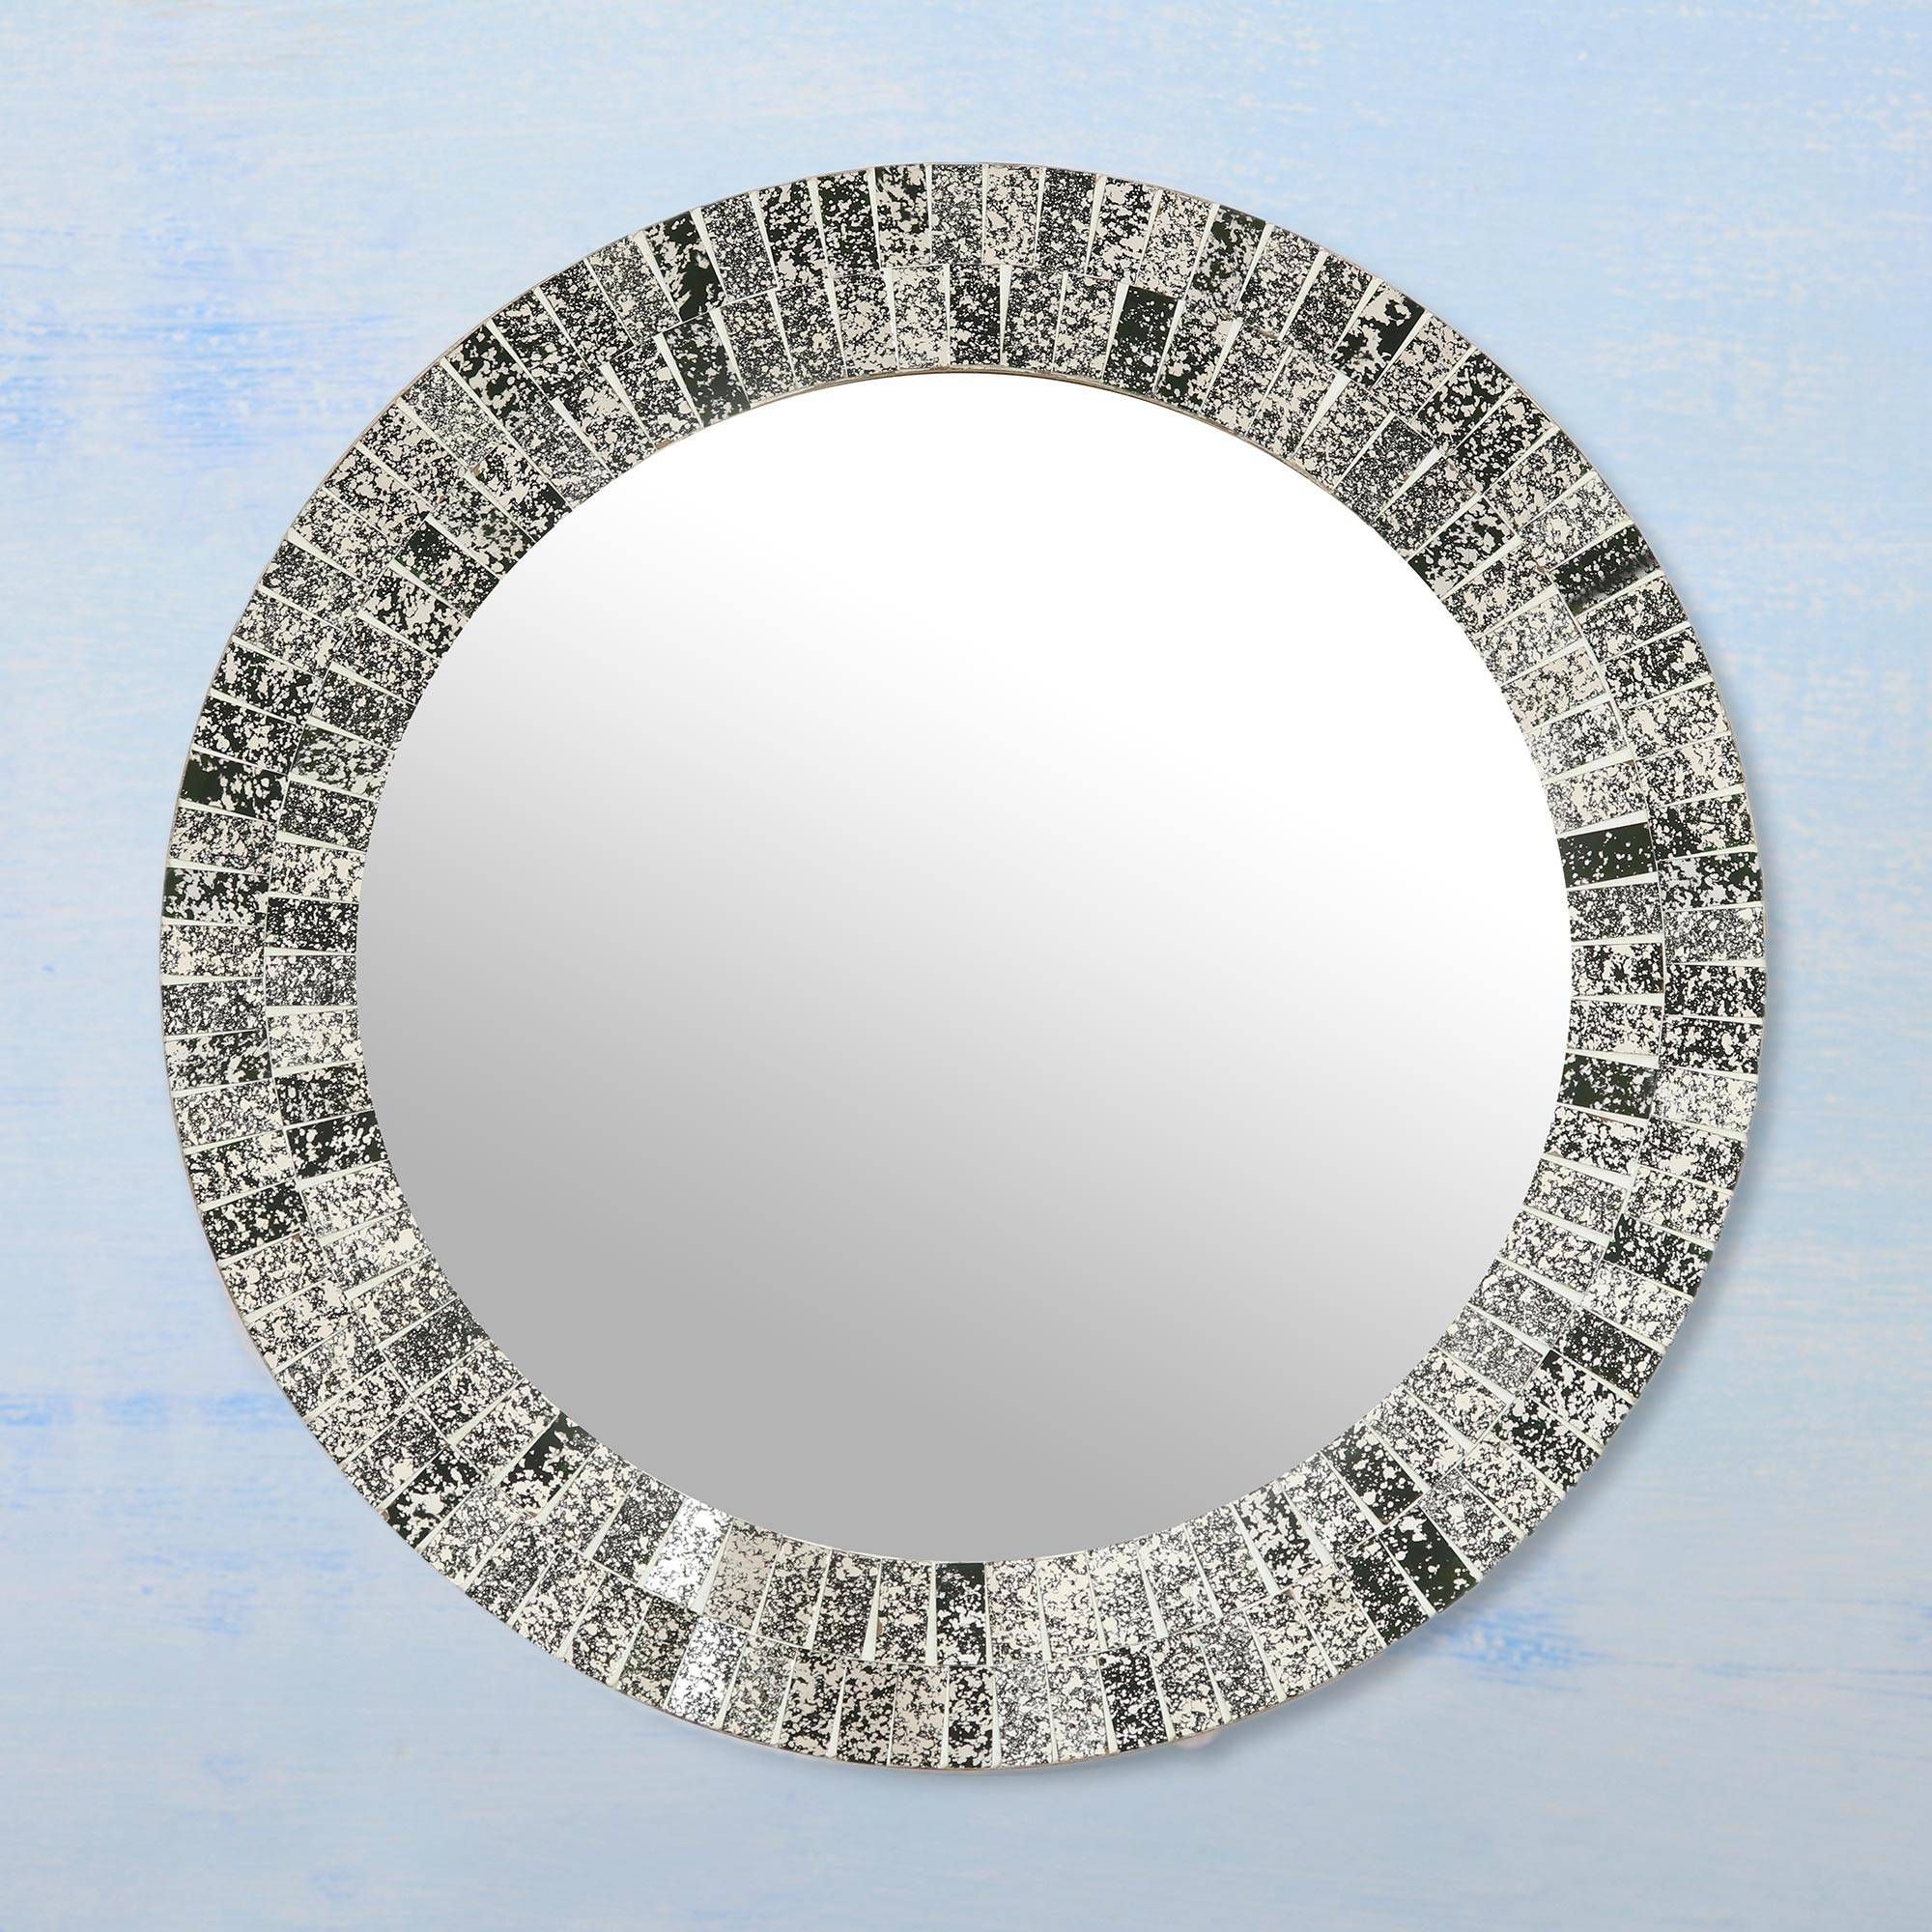 Trendy Hand Crafted Silver And Black Mosaic Tile Round Wall Mirror – Onyx Inside Midnight Black Round Wall Mirrors (View 9 of 15)